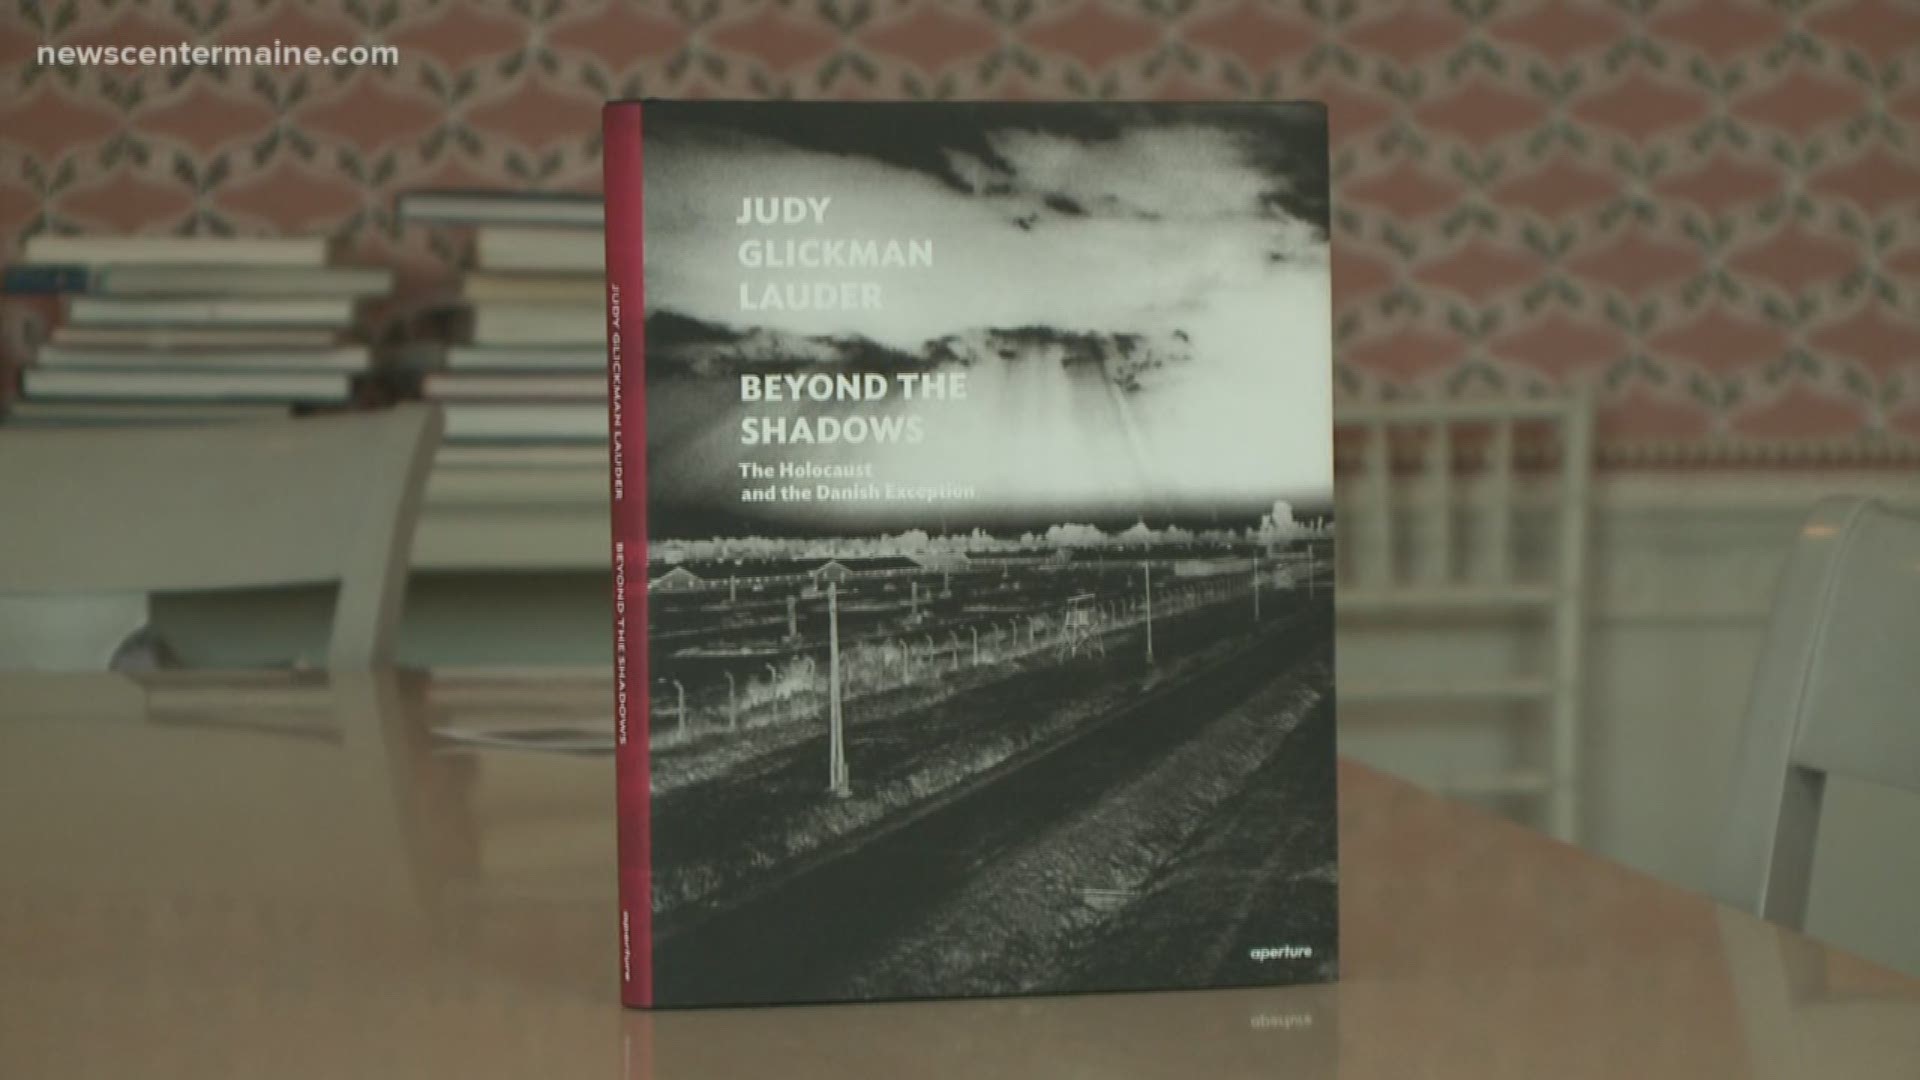 Judy Glickman Lauder spent more than three decades capturing the various horrific scenes of The Holocaust, and telling the stories of those who saved others.